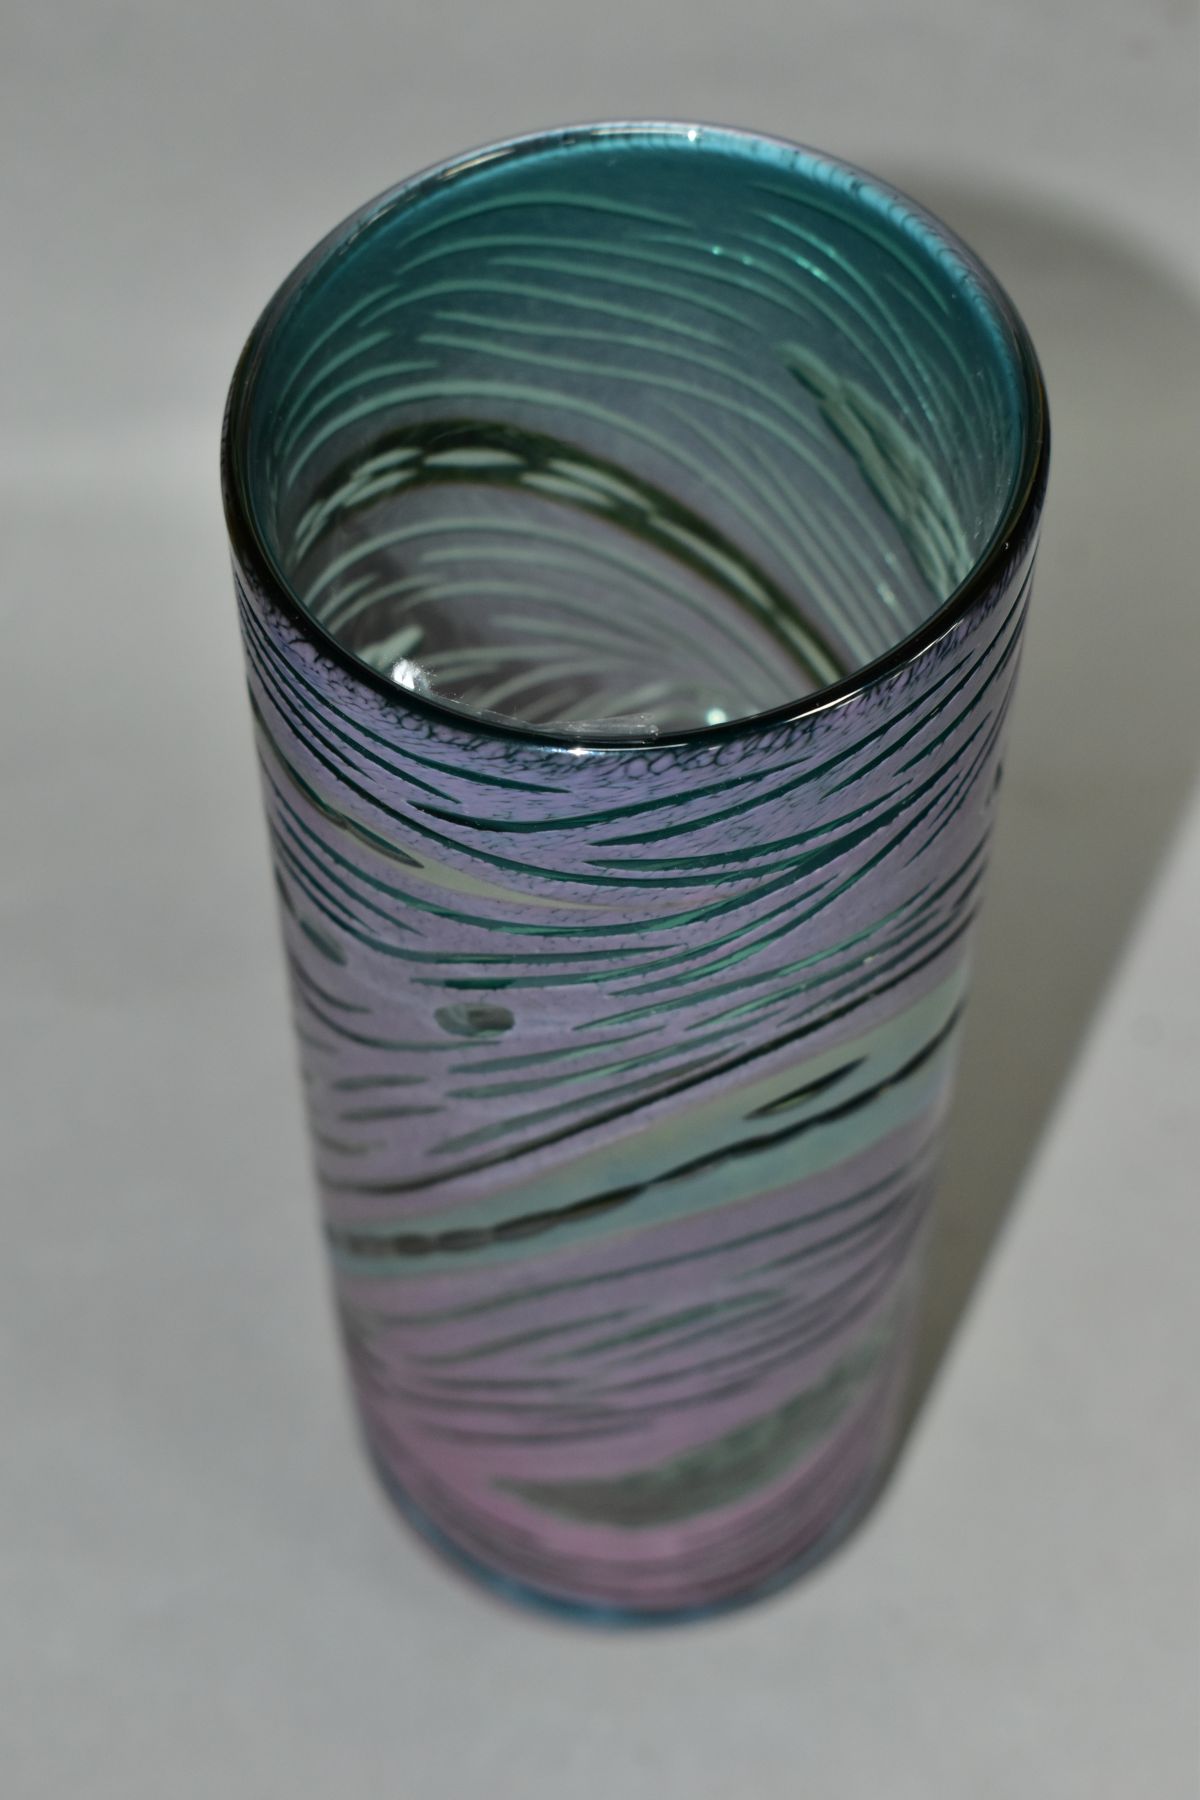 RICHARD GOLDING FOR OKRA GLASS, a cylindrical purple/blue iridescent vase with a textured surface, - Image 4 of 6